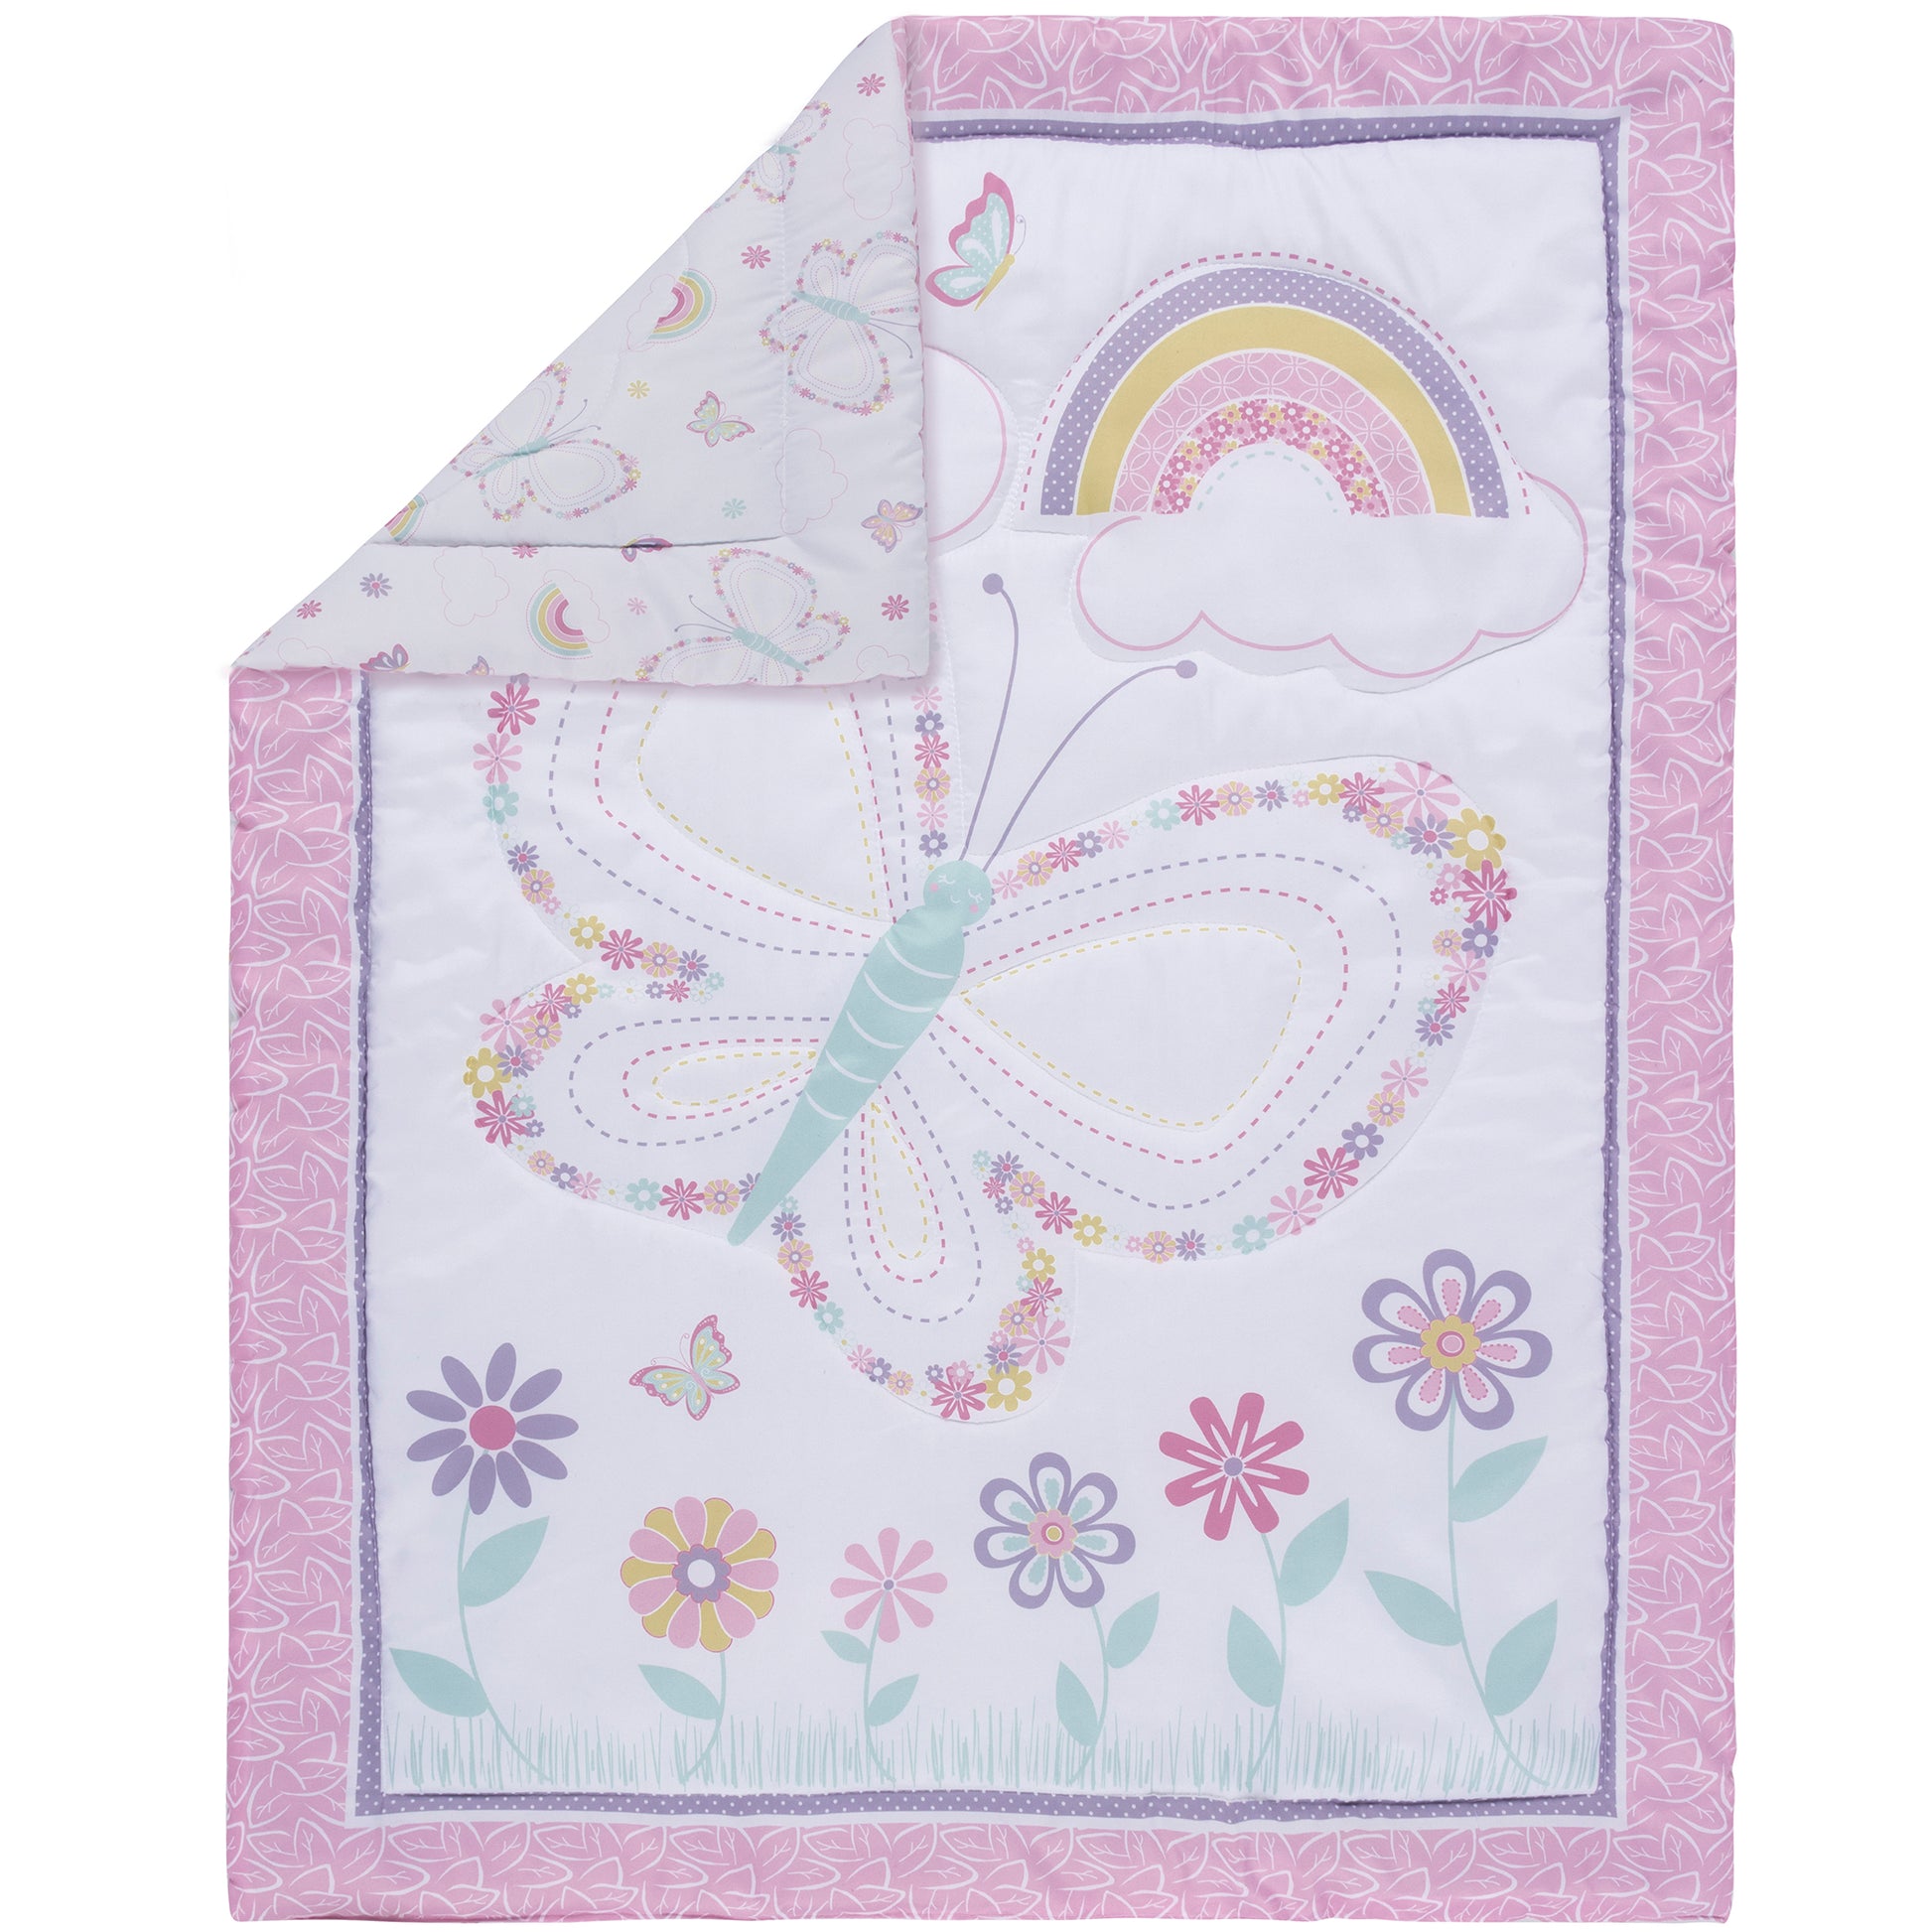  Floral Butterfly 4 Piece Crib Bedding Set; nursery quilt with folded corner